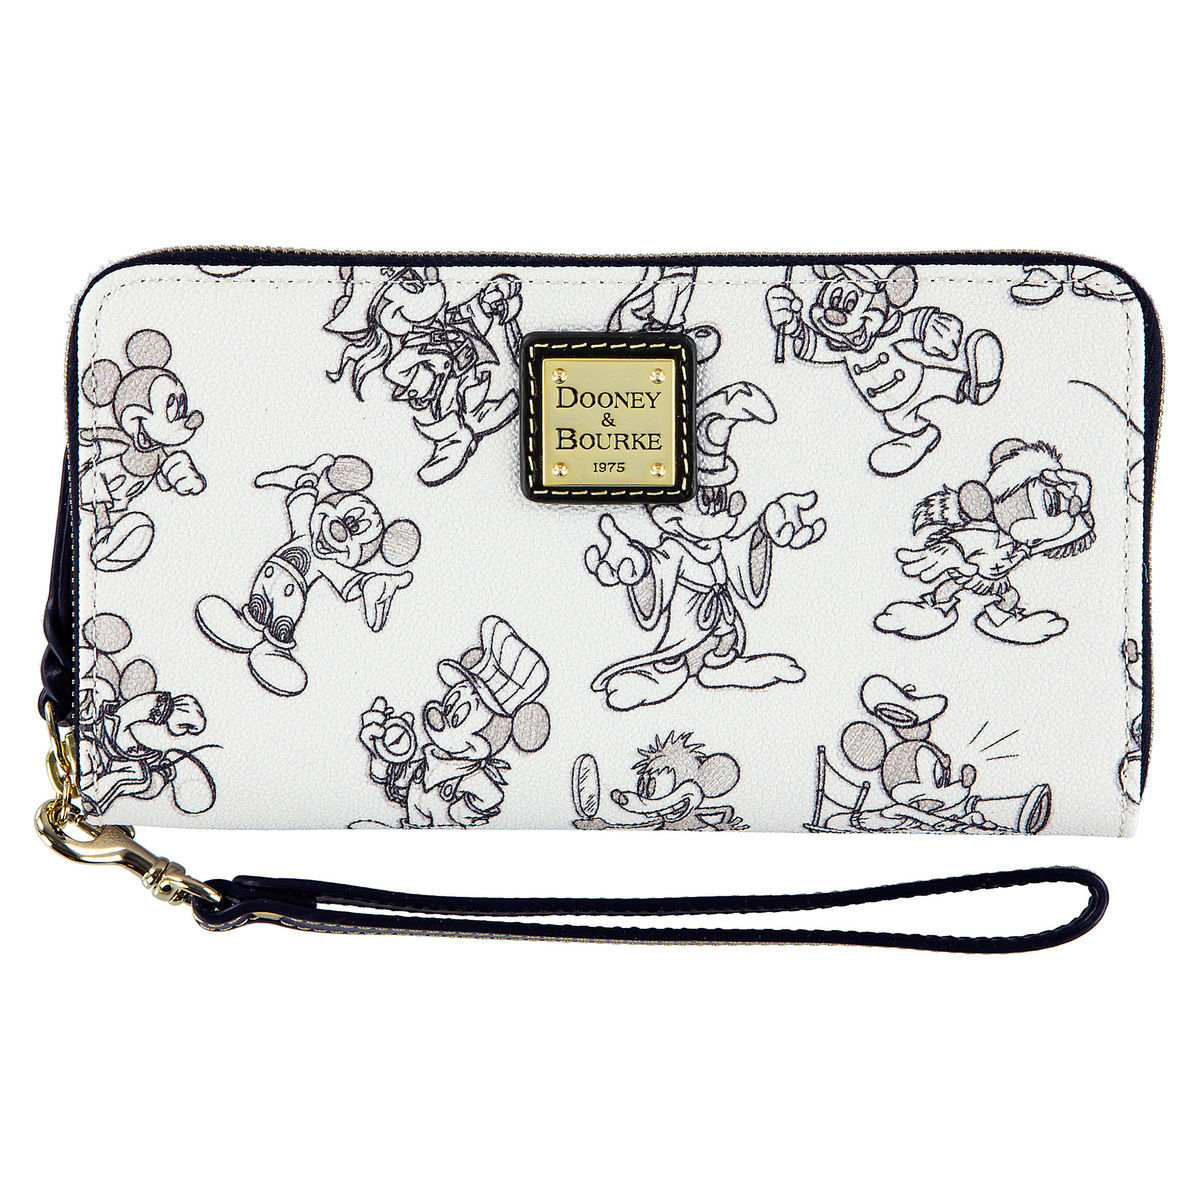 New Mickey Mouse Dooney & Bourke Collection Out Now – DisKingdom.com